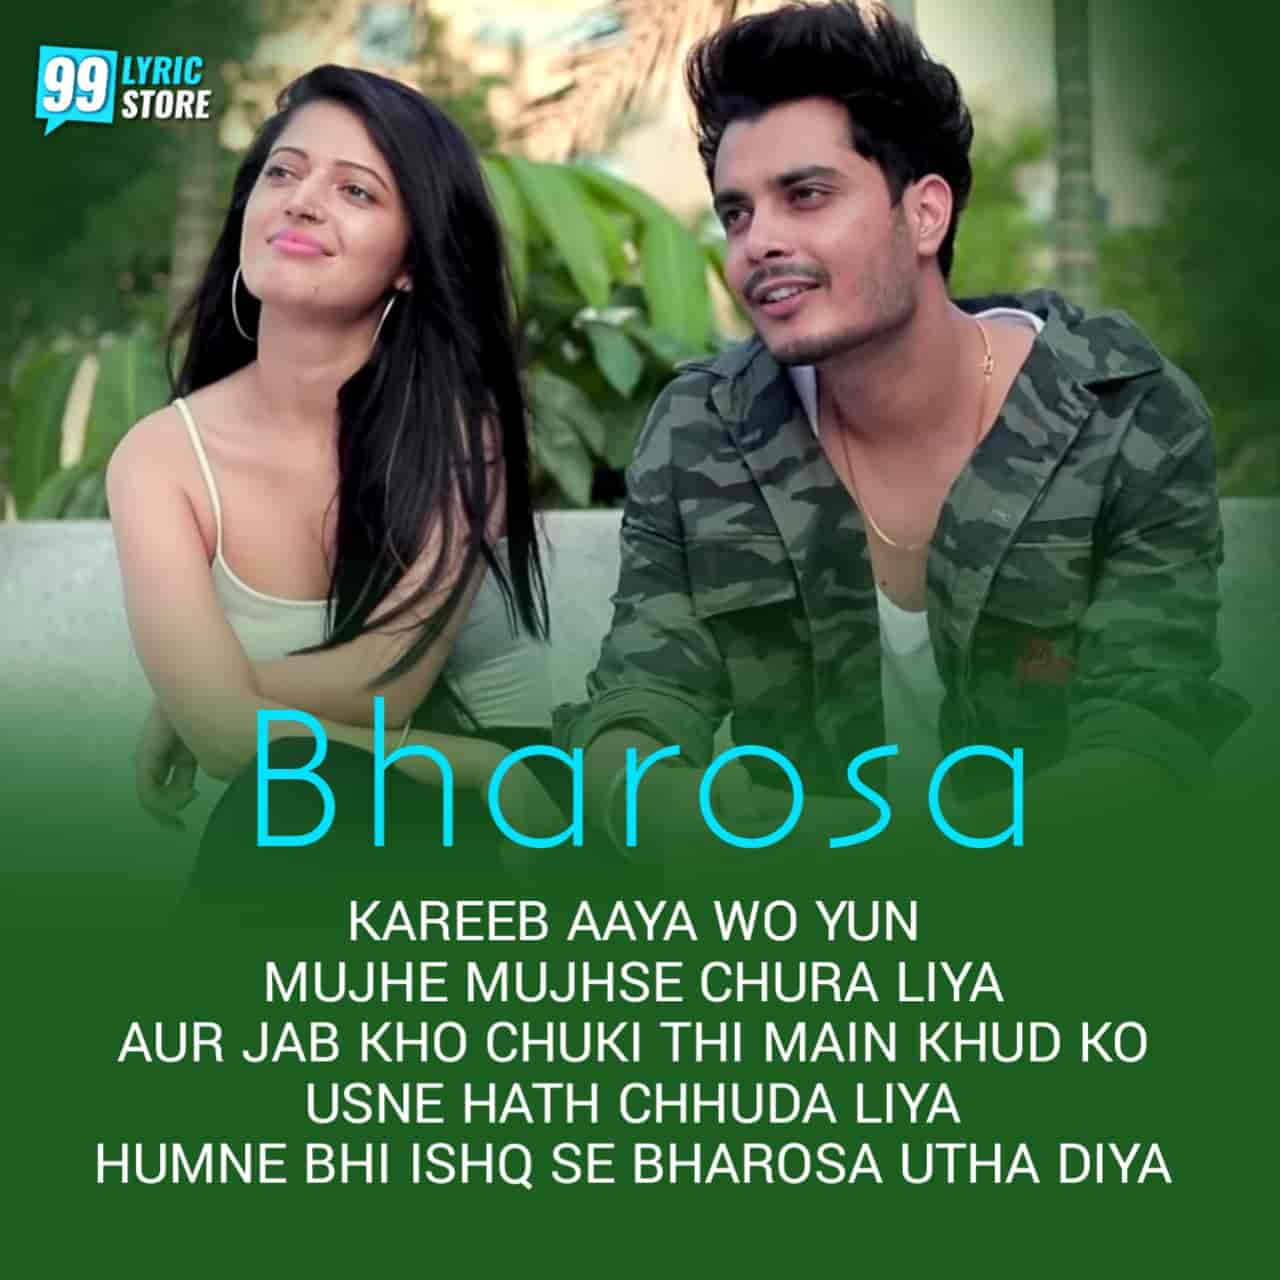 A new and beautiful Shayari 'Bharosa' written by Gurnazar Chattha and Charlie Chauhan, and performed also in this shayari video which make more catchy this shayari. This shayari is presented by Gurnazar Chattha official label.